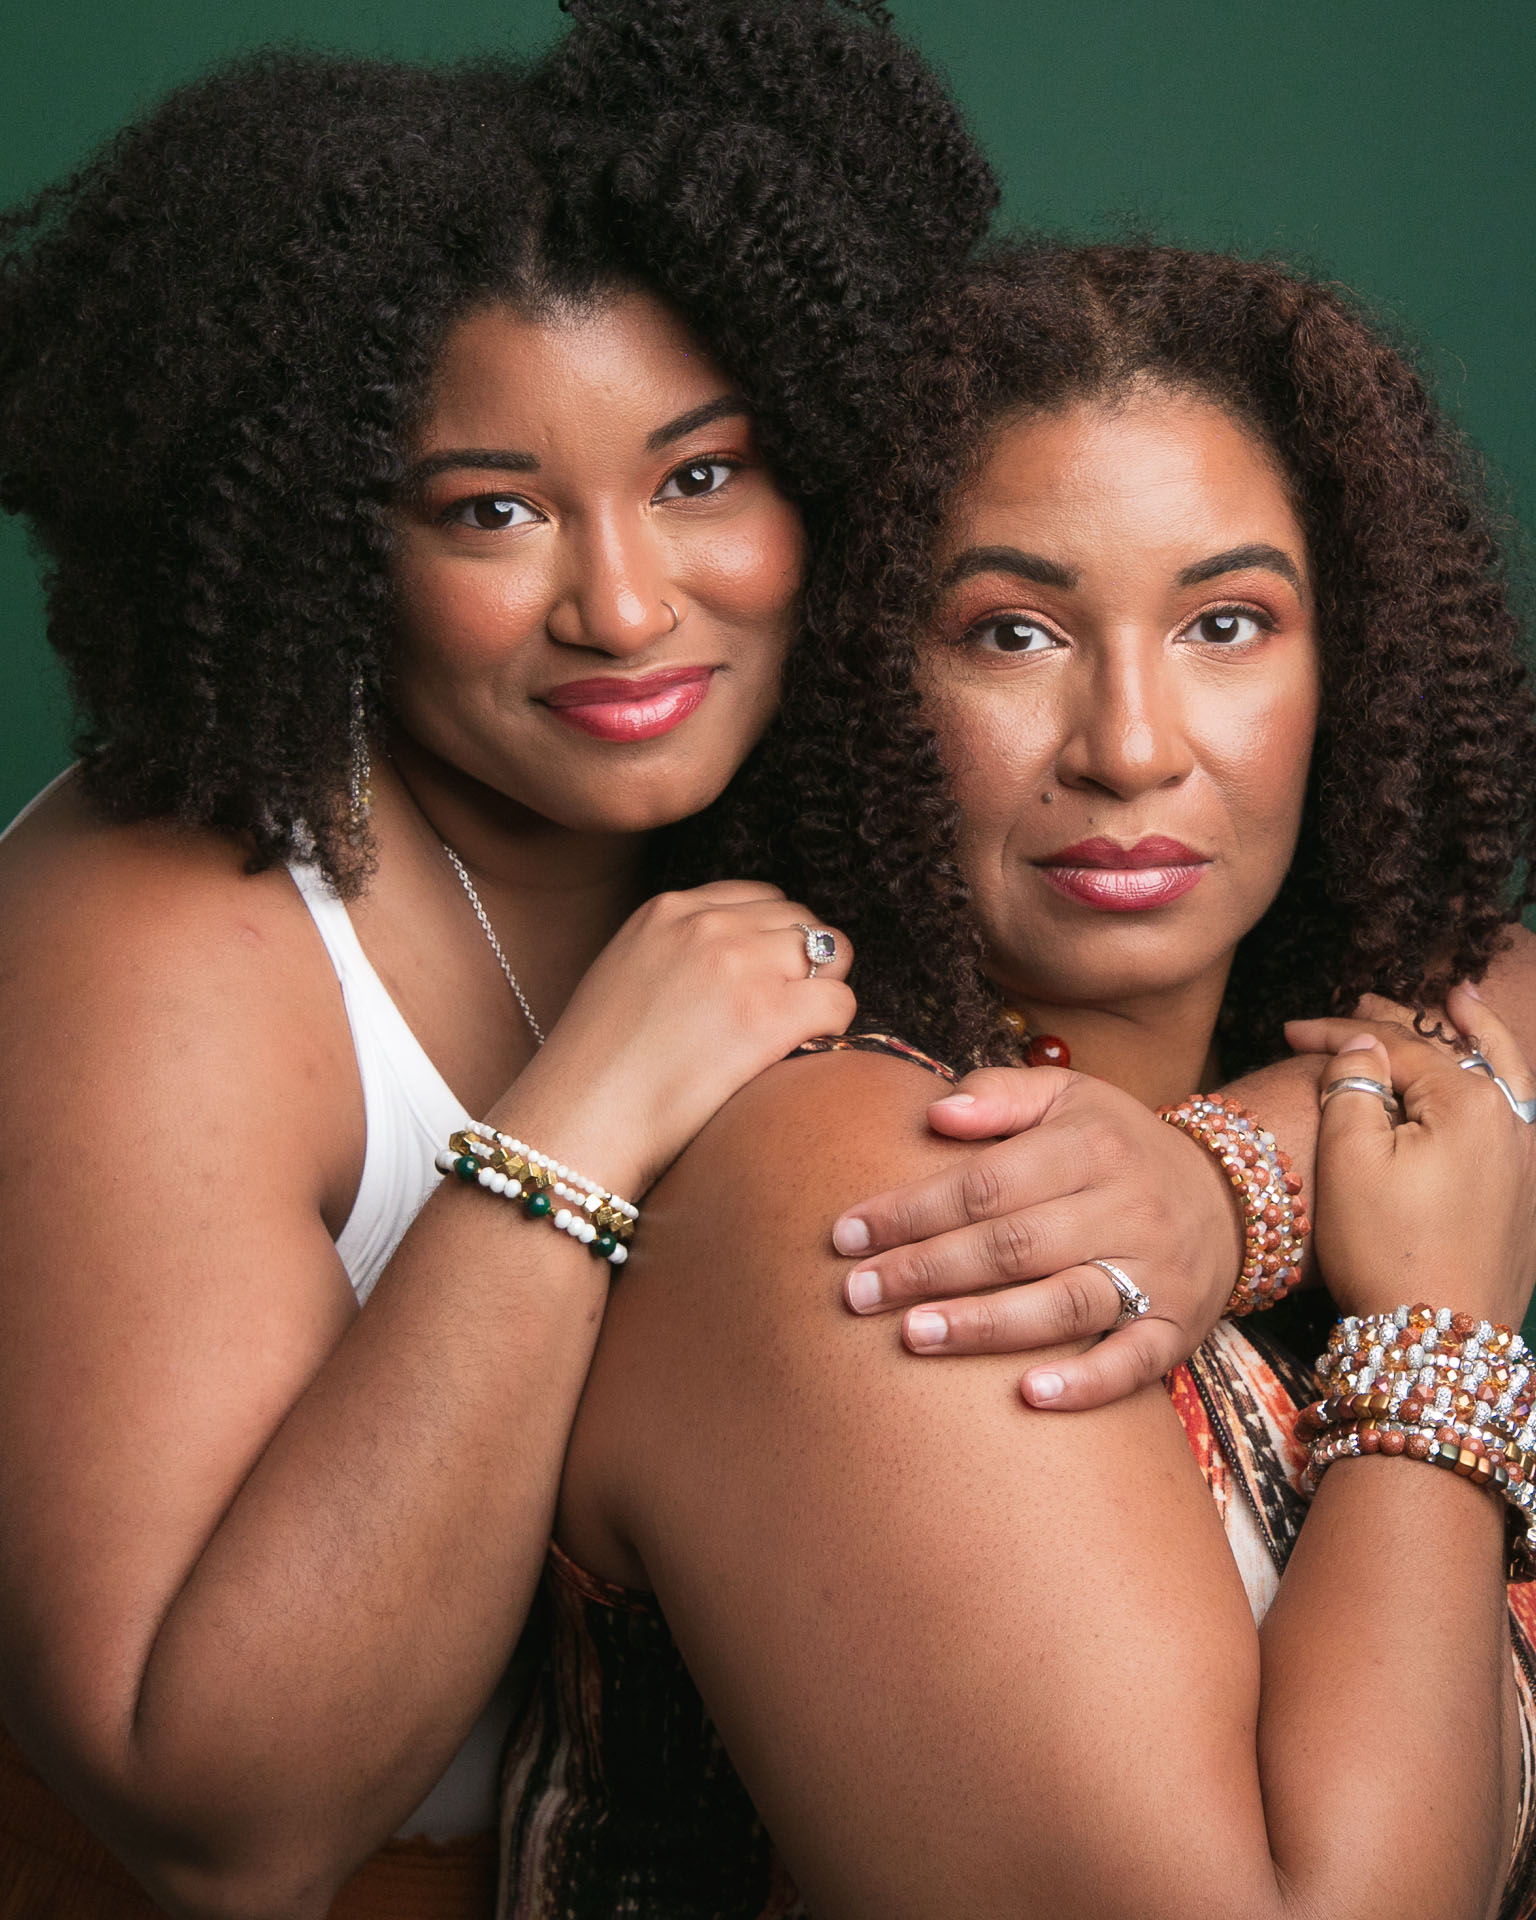 two black women with brown and black curly hair hugging each other soft smiling for camera